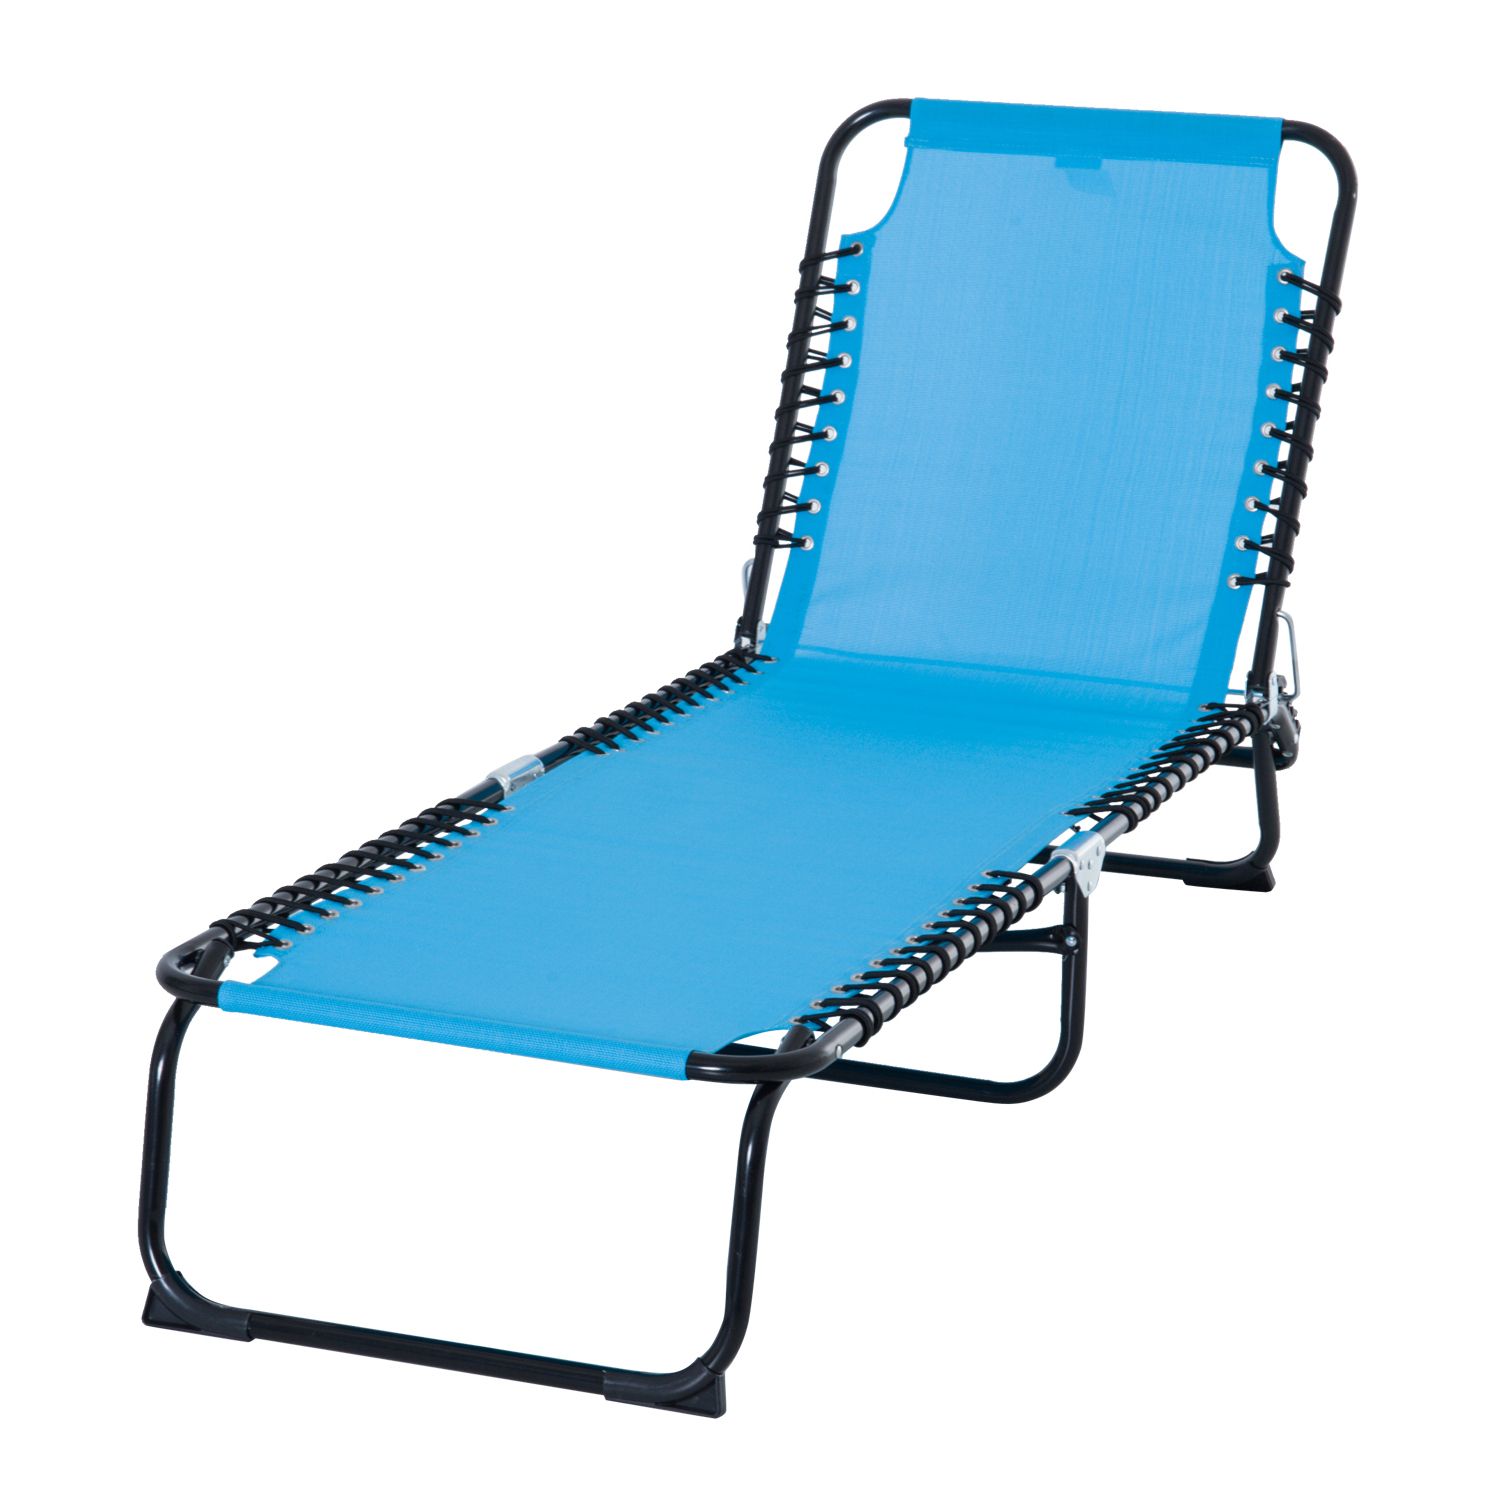 3 Position Portable Folding Reclining Beach Chaise Lounges Throughout Trendy Outsunny 3 Position Portable Reclining Beach Chaise Lounge Folding Chair  Outdoor Patio – Light Blue (View 1 of 25)